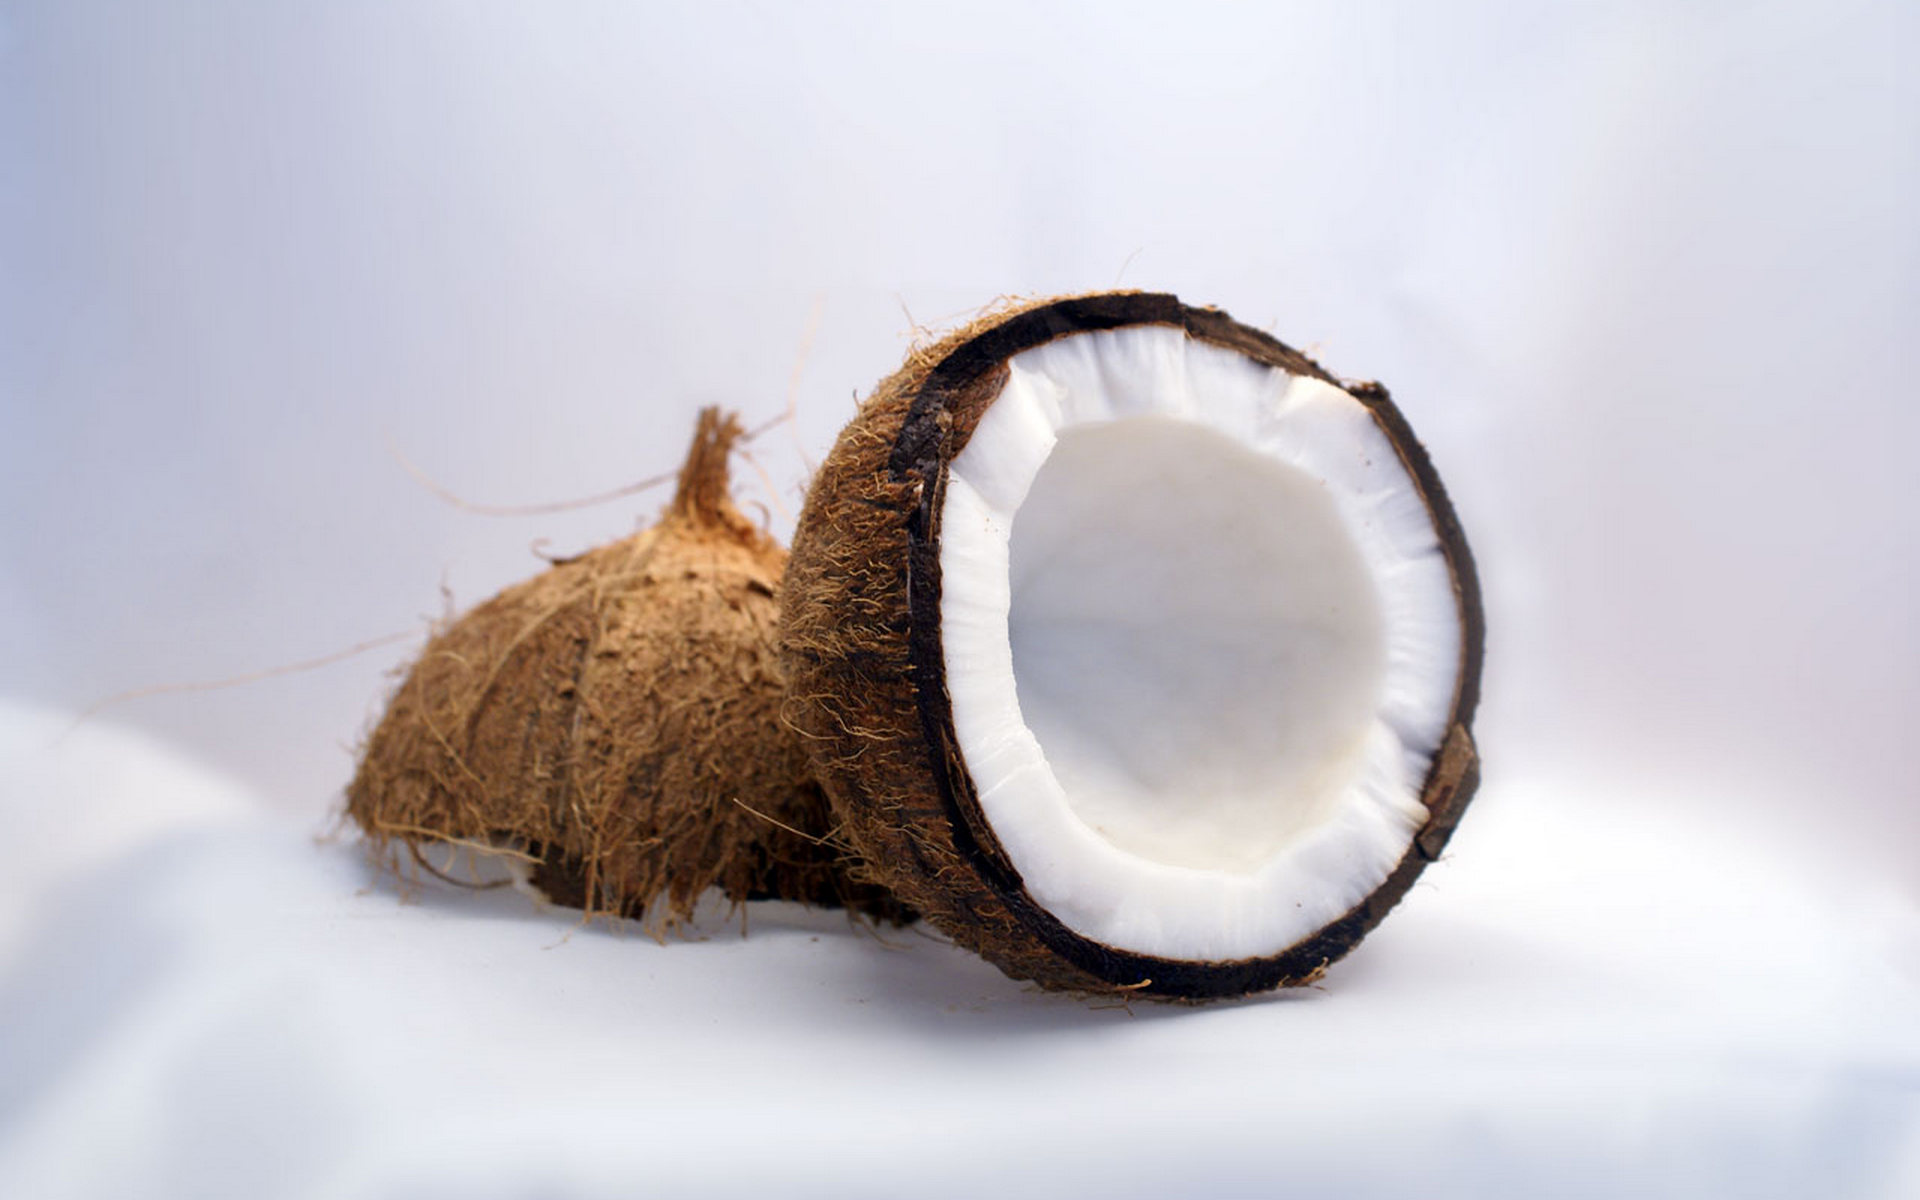  Coconut HQ Background Images